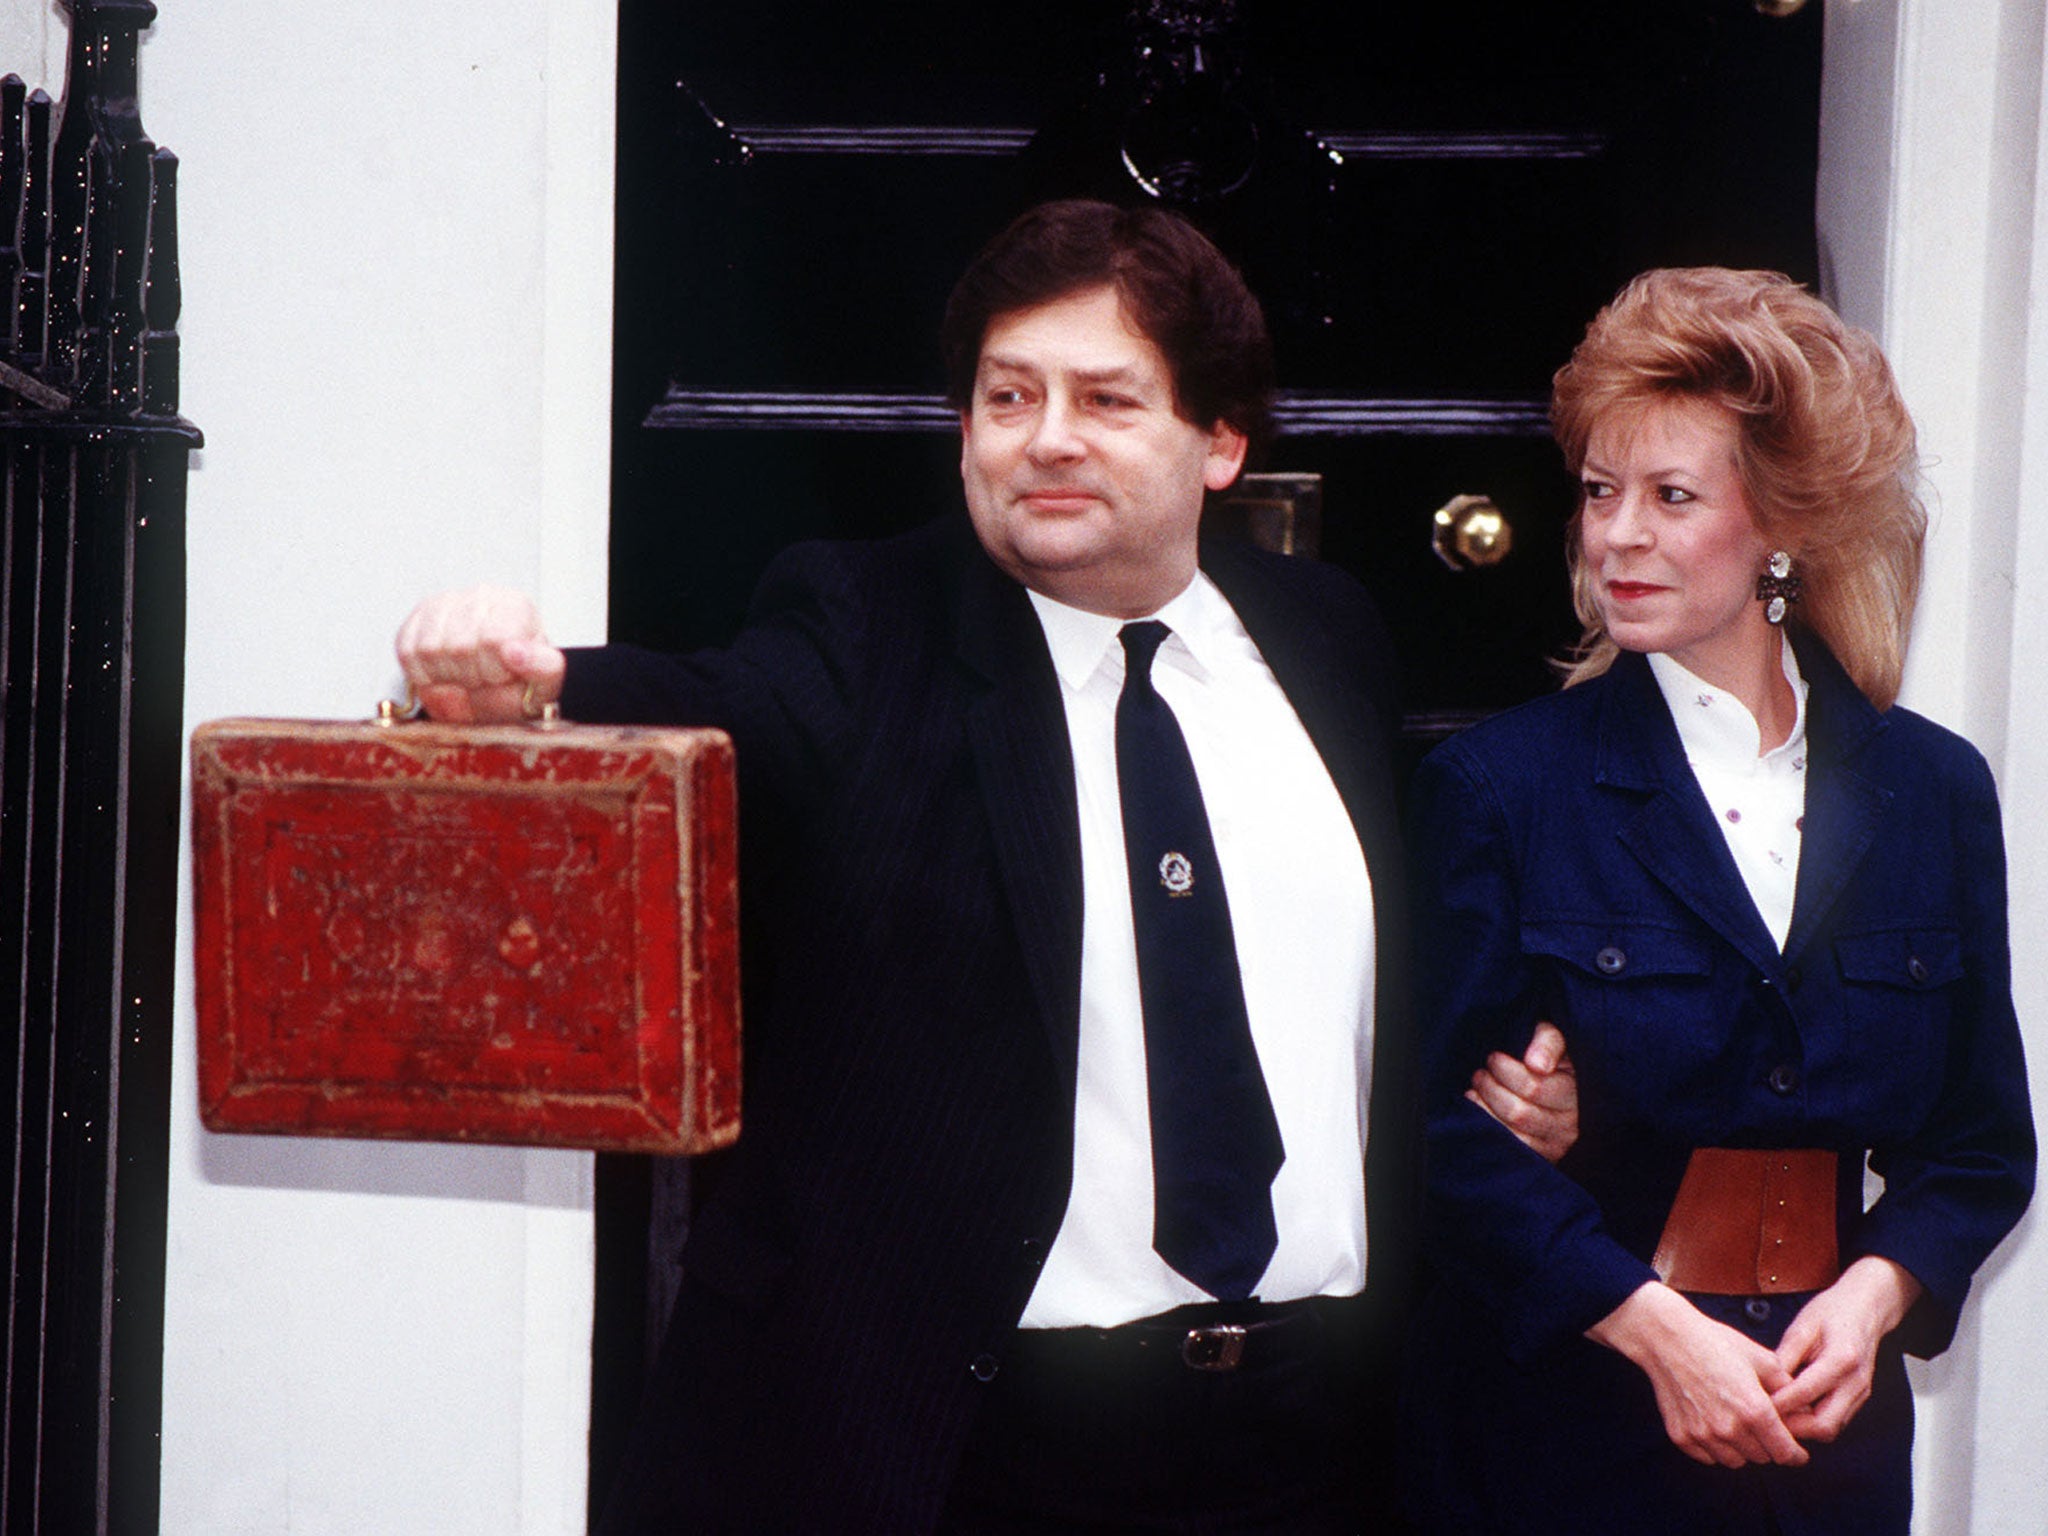 Nigel Lawson, then the Chancellor, pushed for a new Jaguar